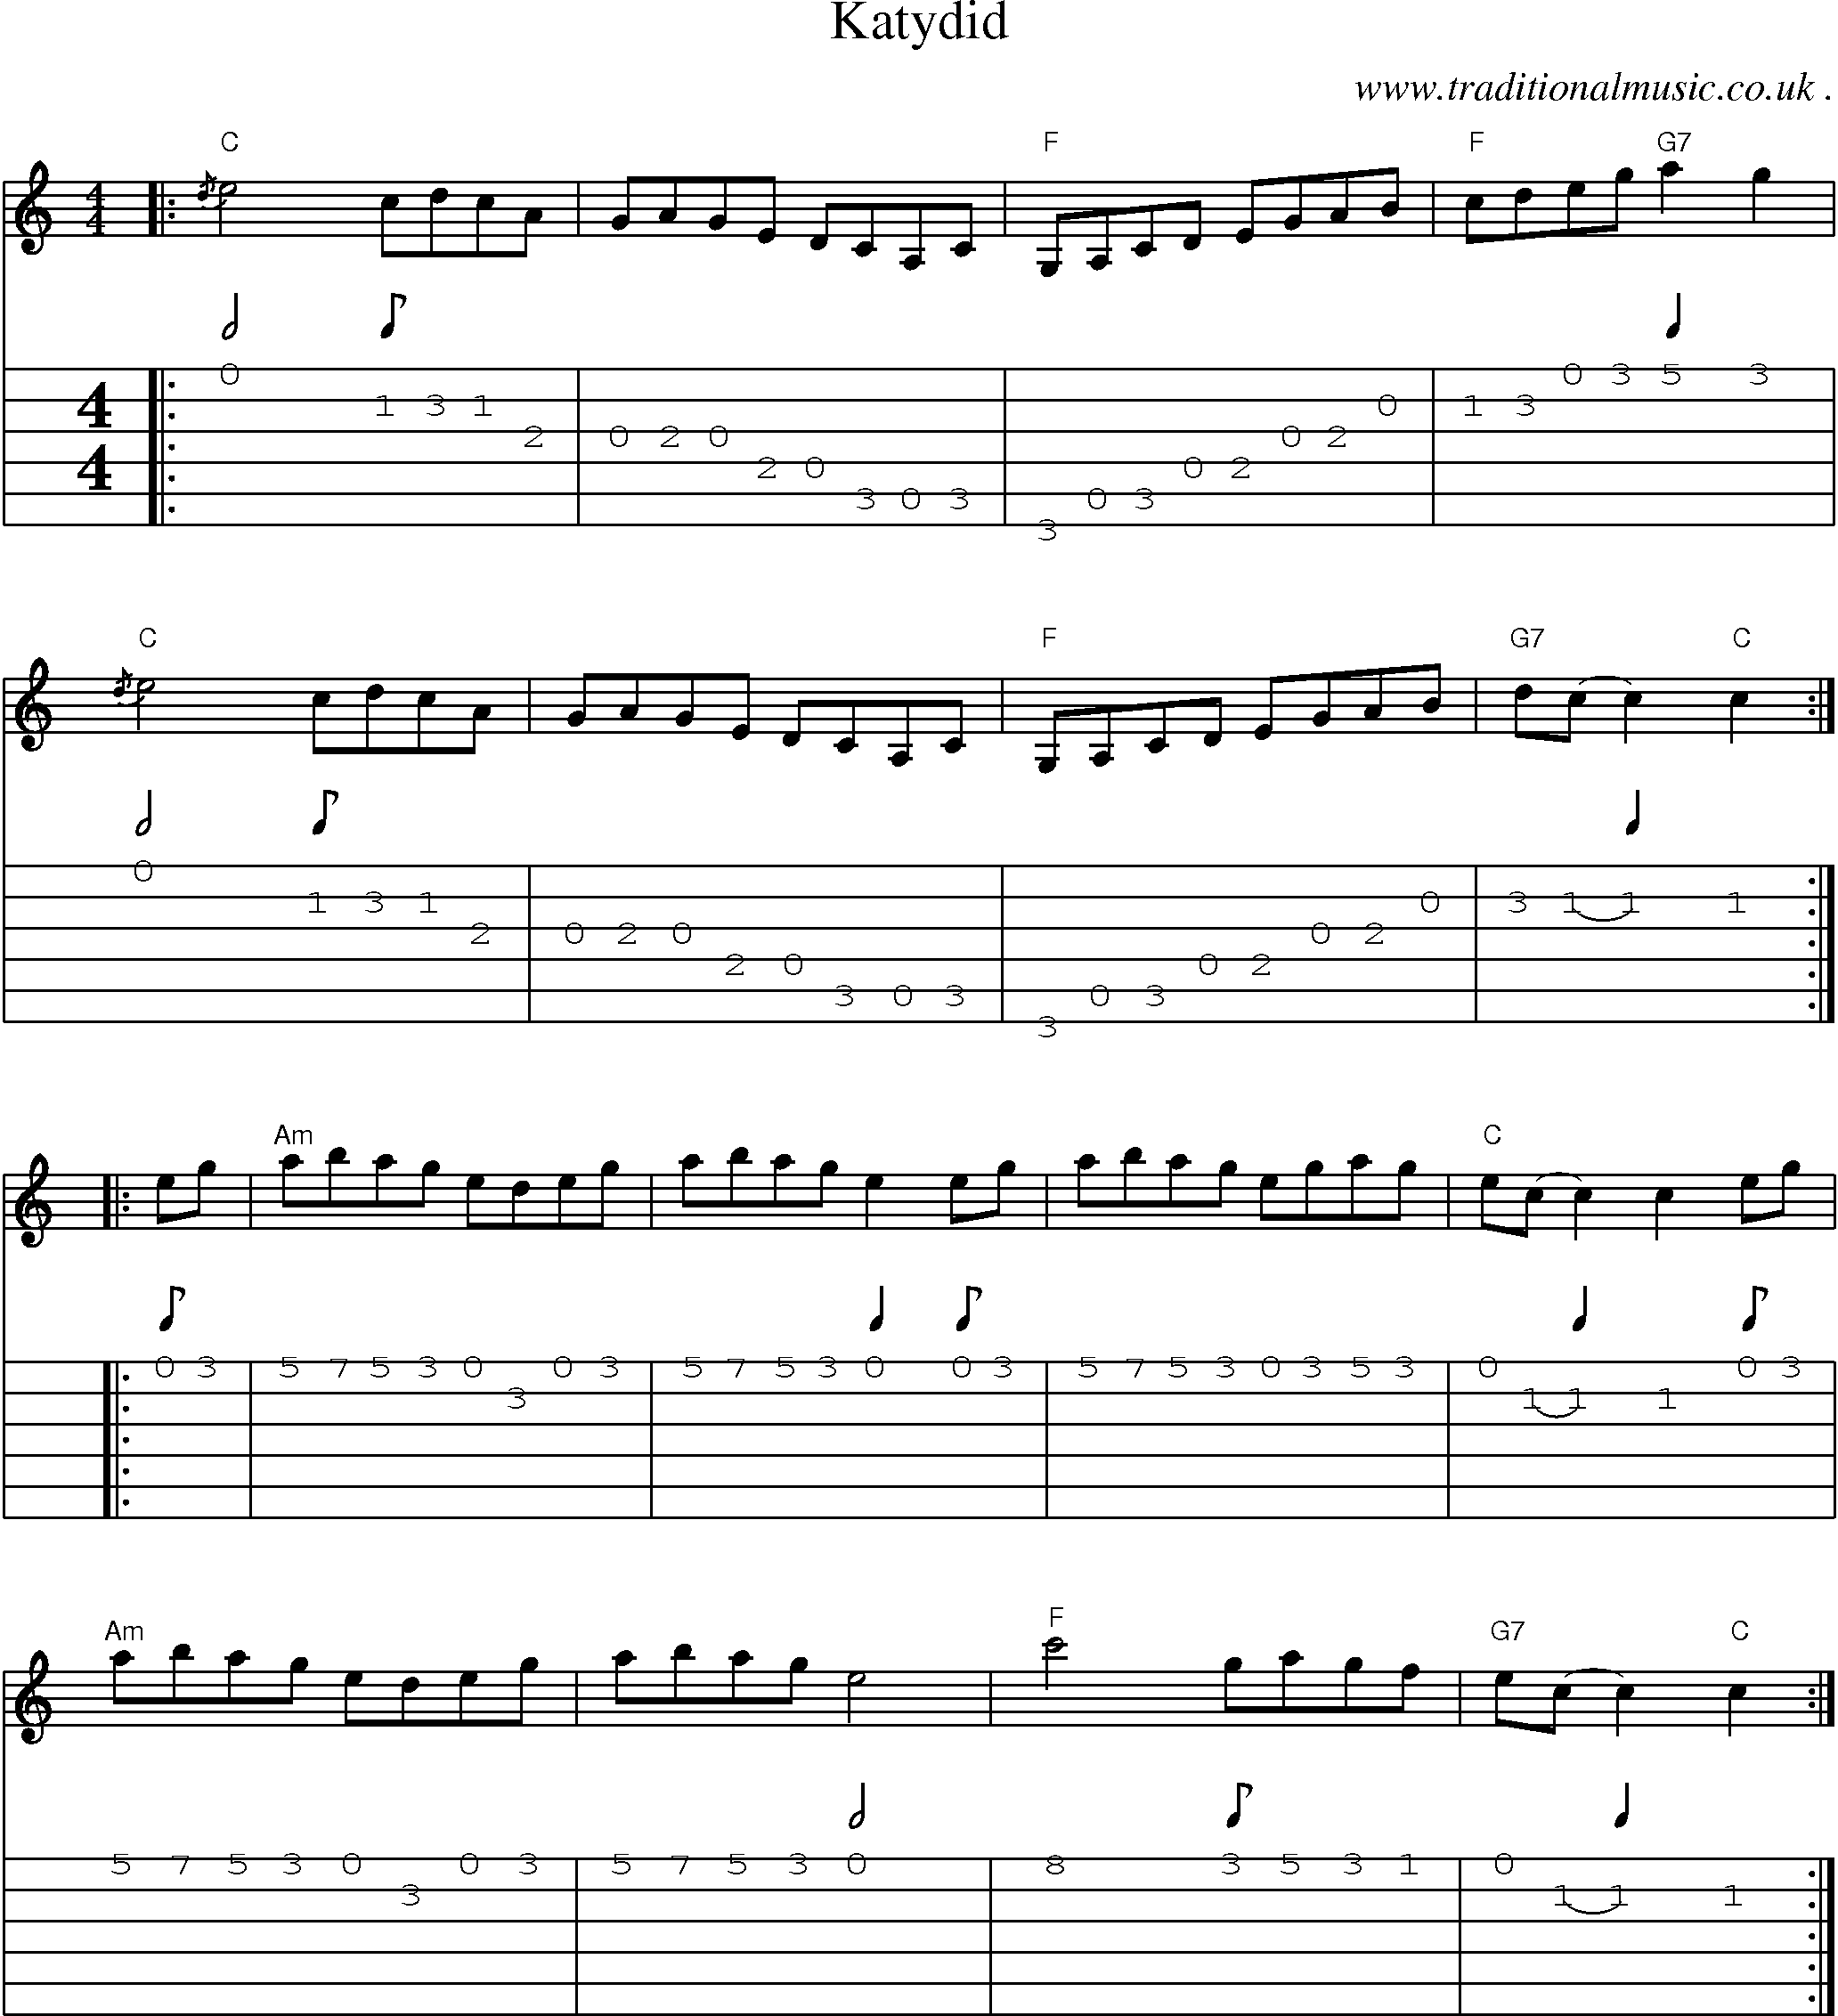 Music Score and Guitar Tabs for Katydid